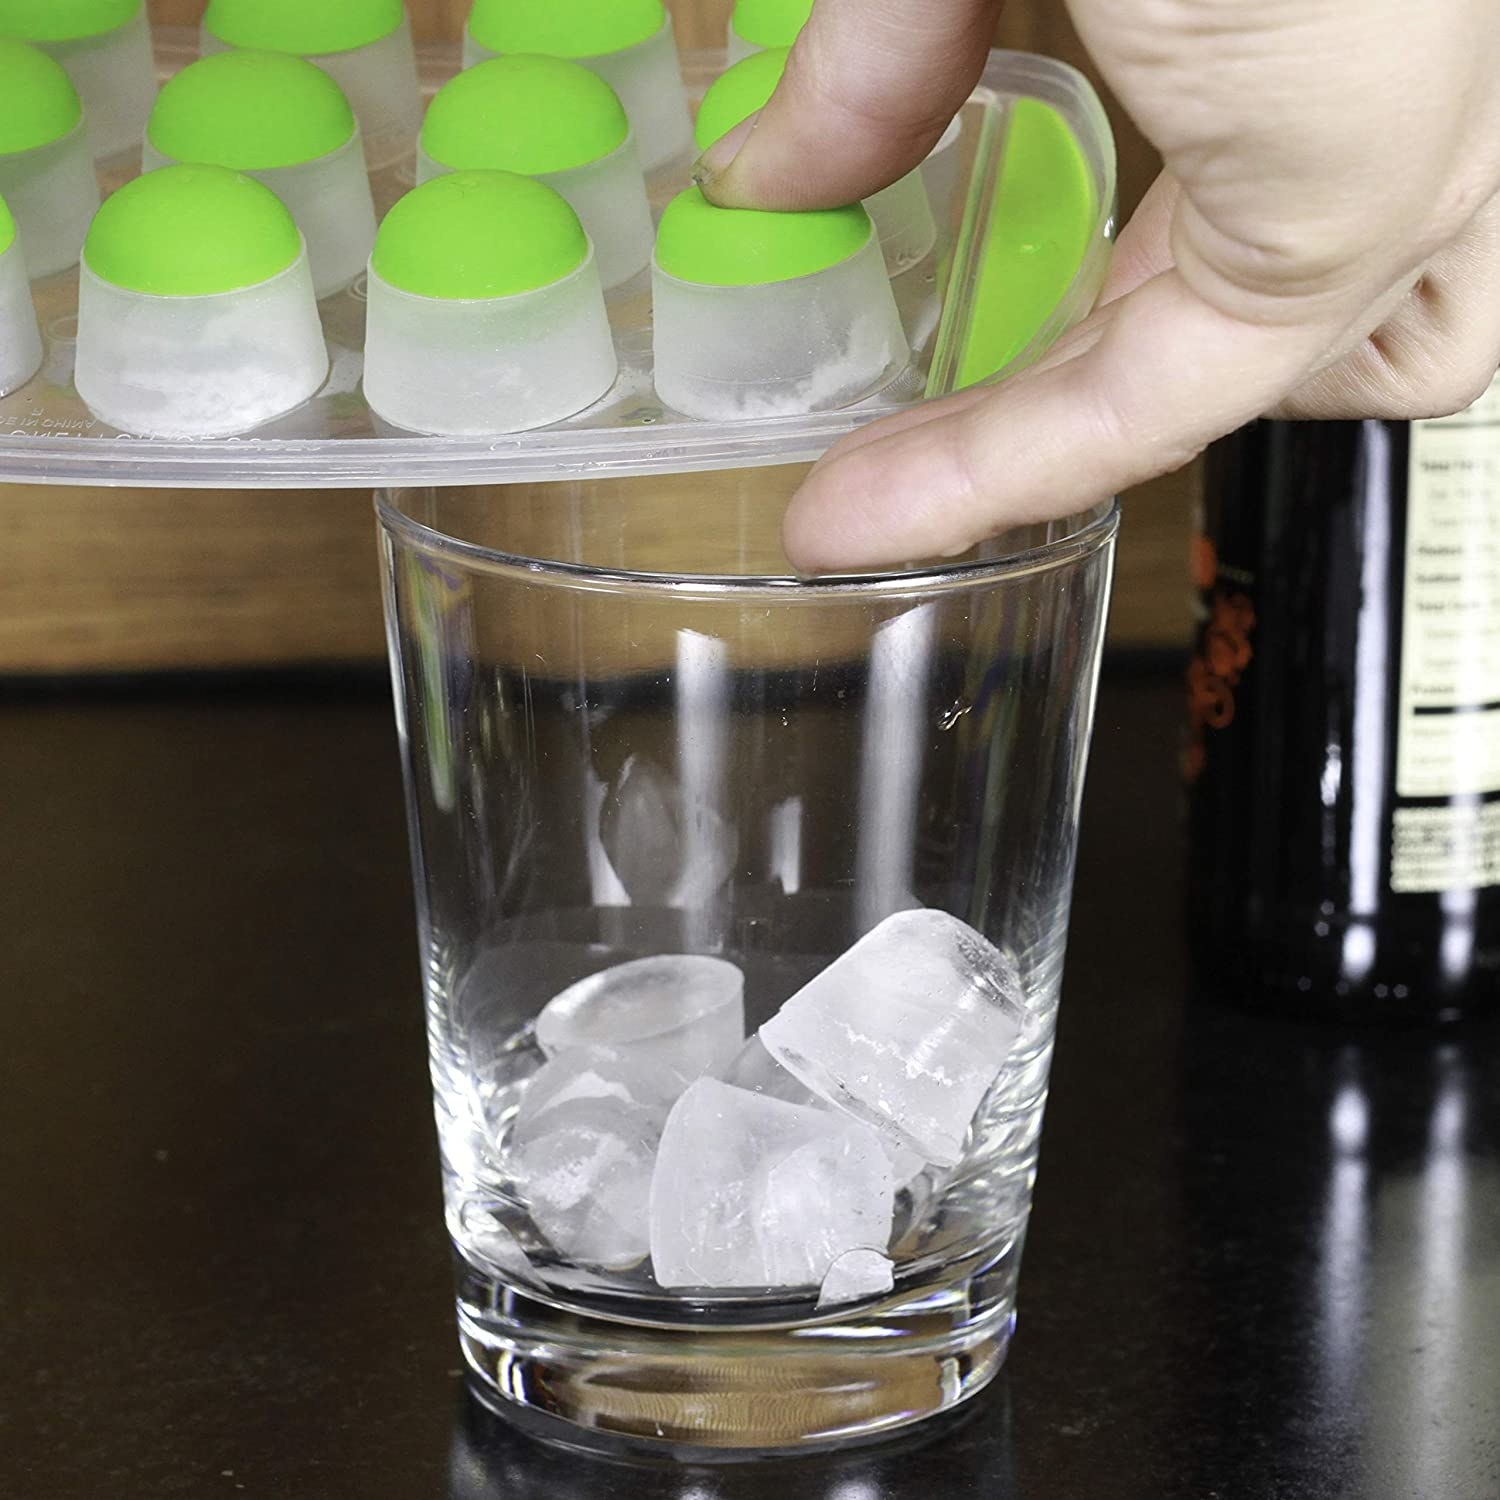 A person putting ice cubes into a glass cup